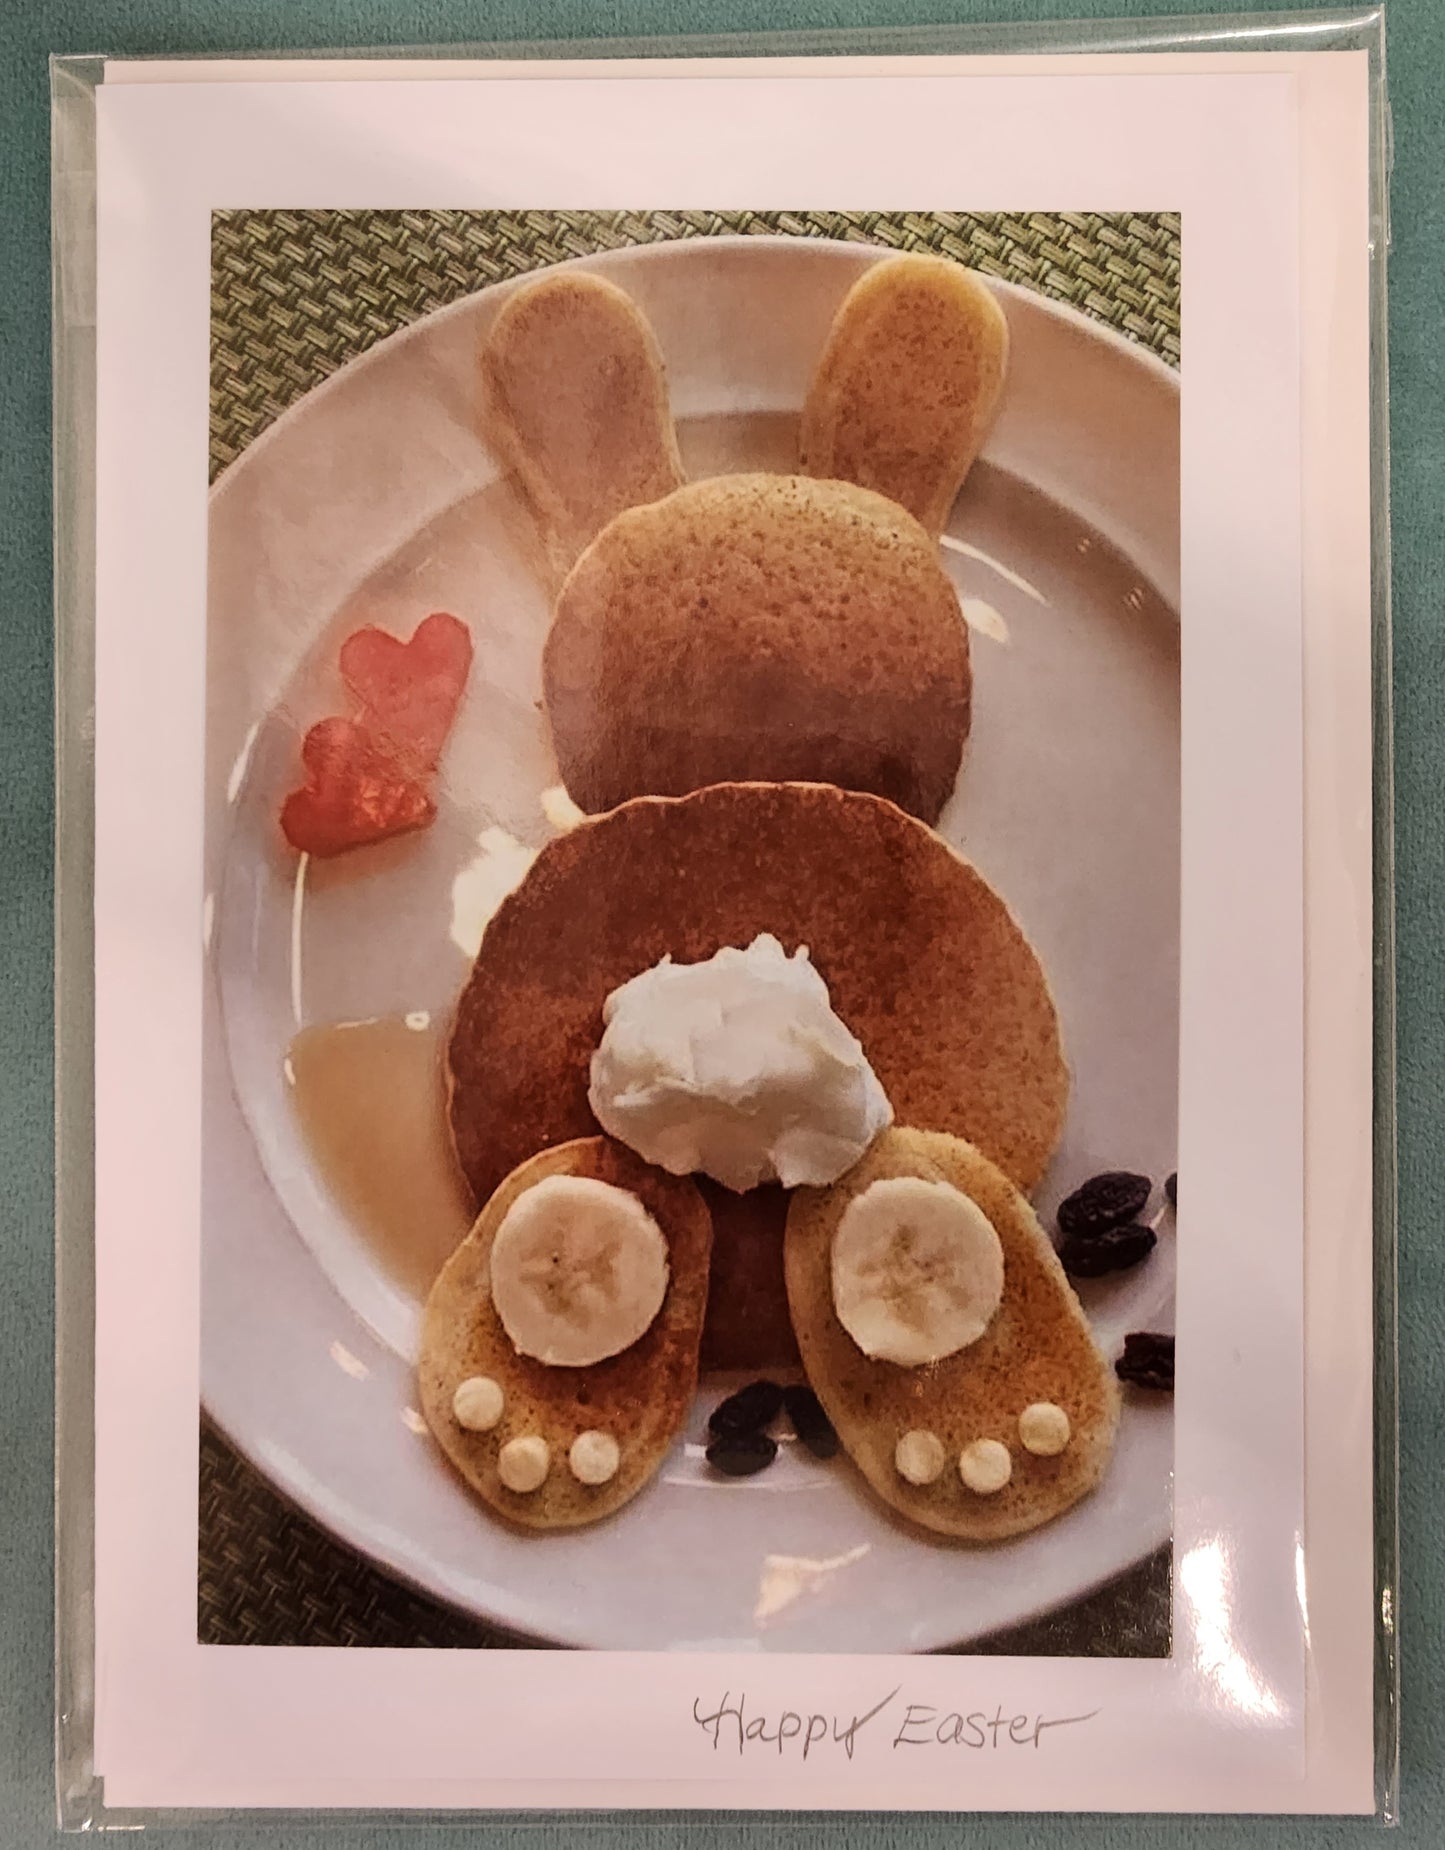 BARBSCARDS HAPPY EASTER COLLECTION: BUNNY PANCAKE